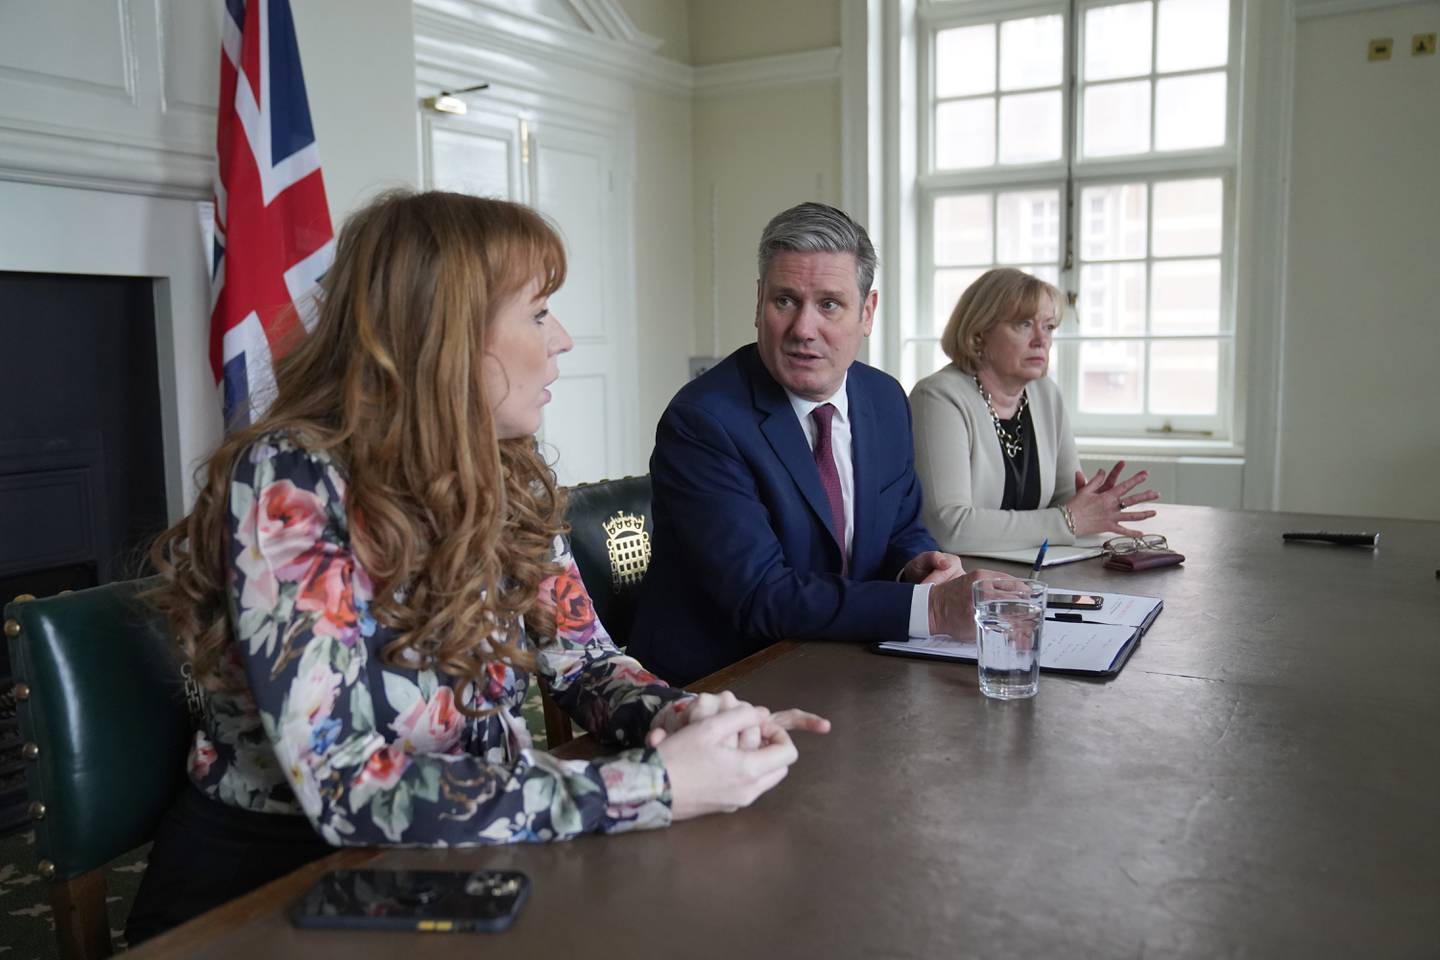 Labour leader Keir Starmer holds a shadow cabinet meeting with deputy leader Angela Rayner, left, and shadow leader of the House of Lords Baroness Angela Smith, right. PA